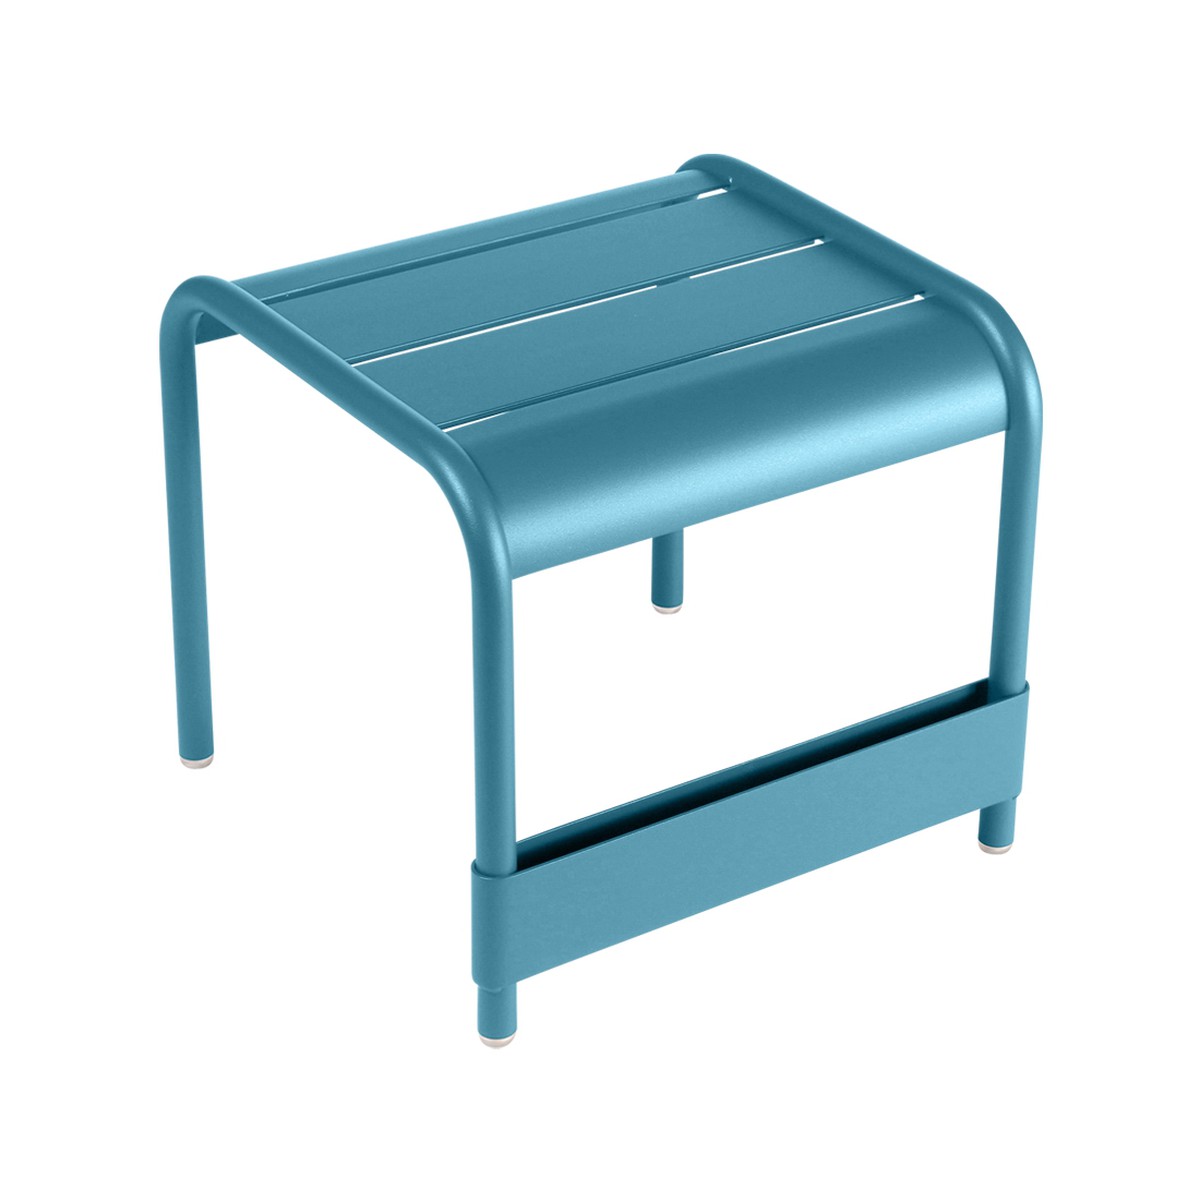 Fermob LUXEMBOURG Table basse Luxembourg petite Bleu turquoise 43x42x40cm